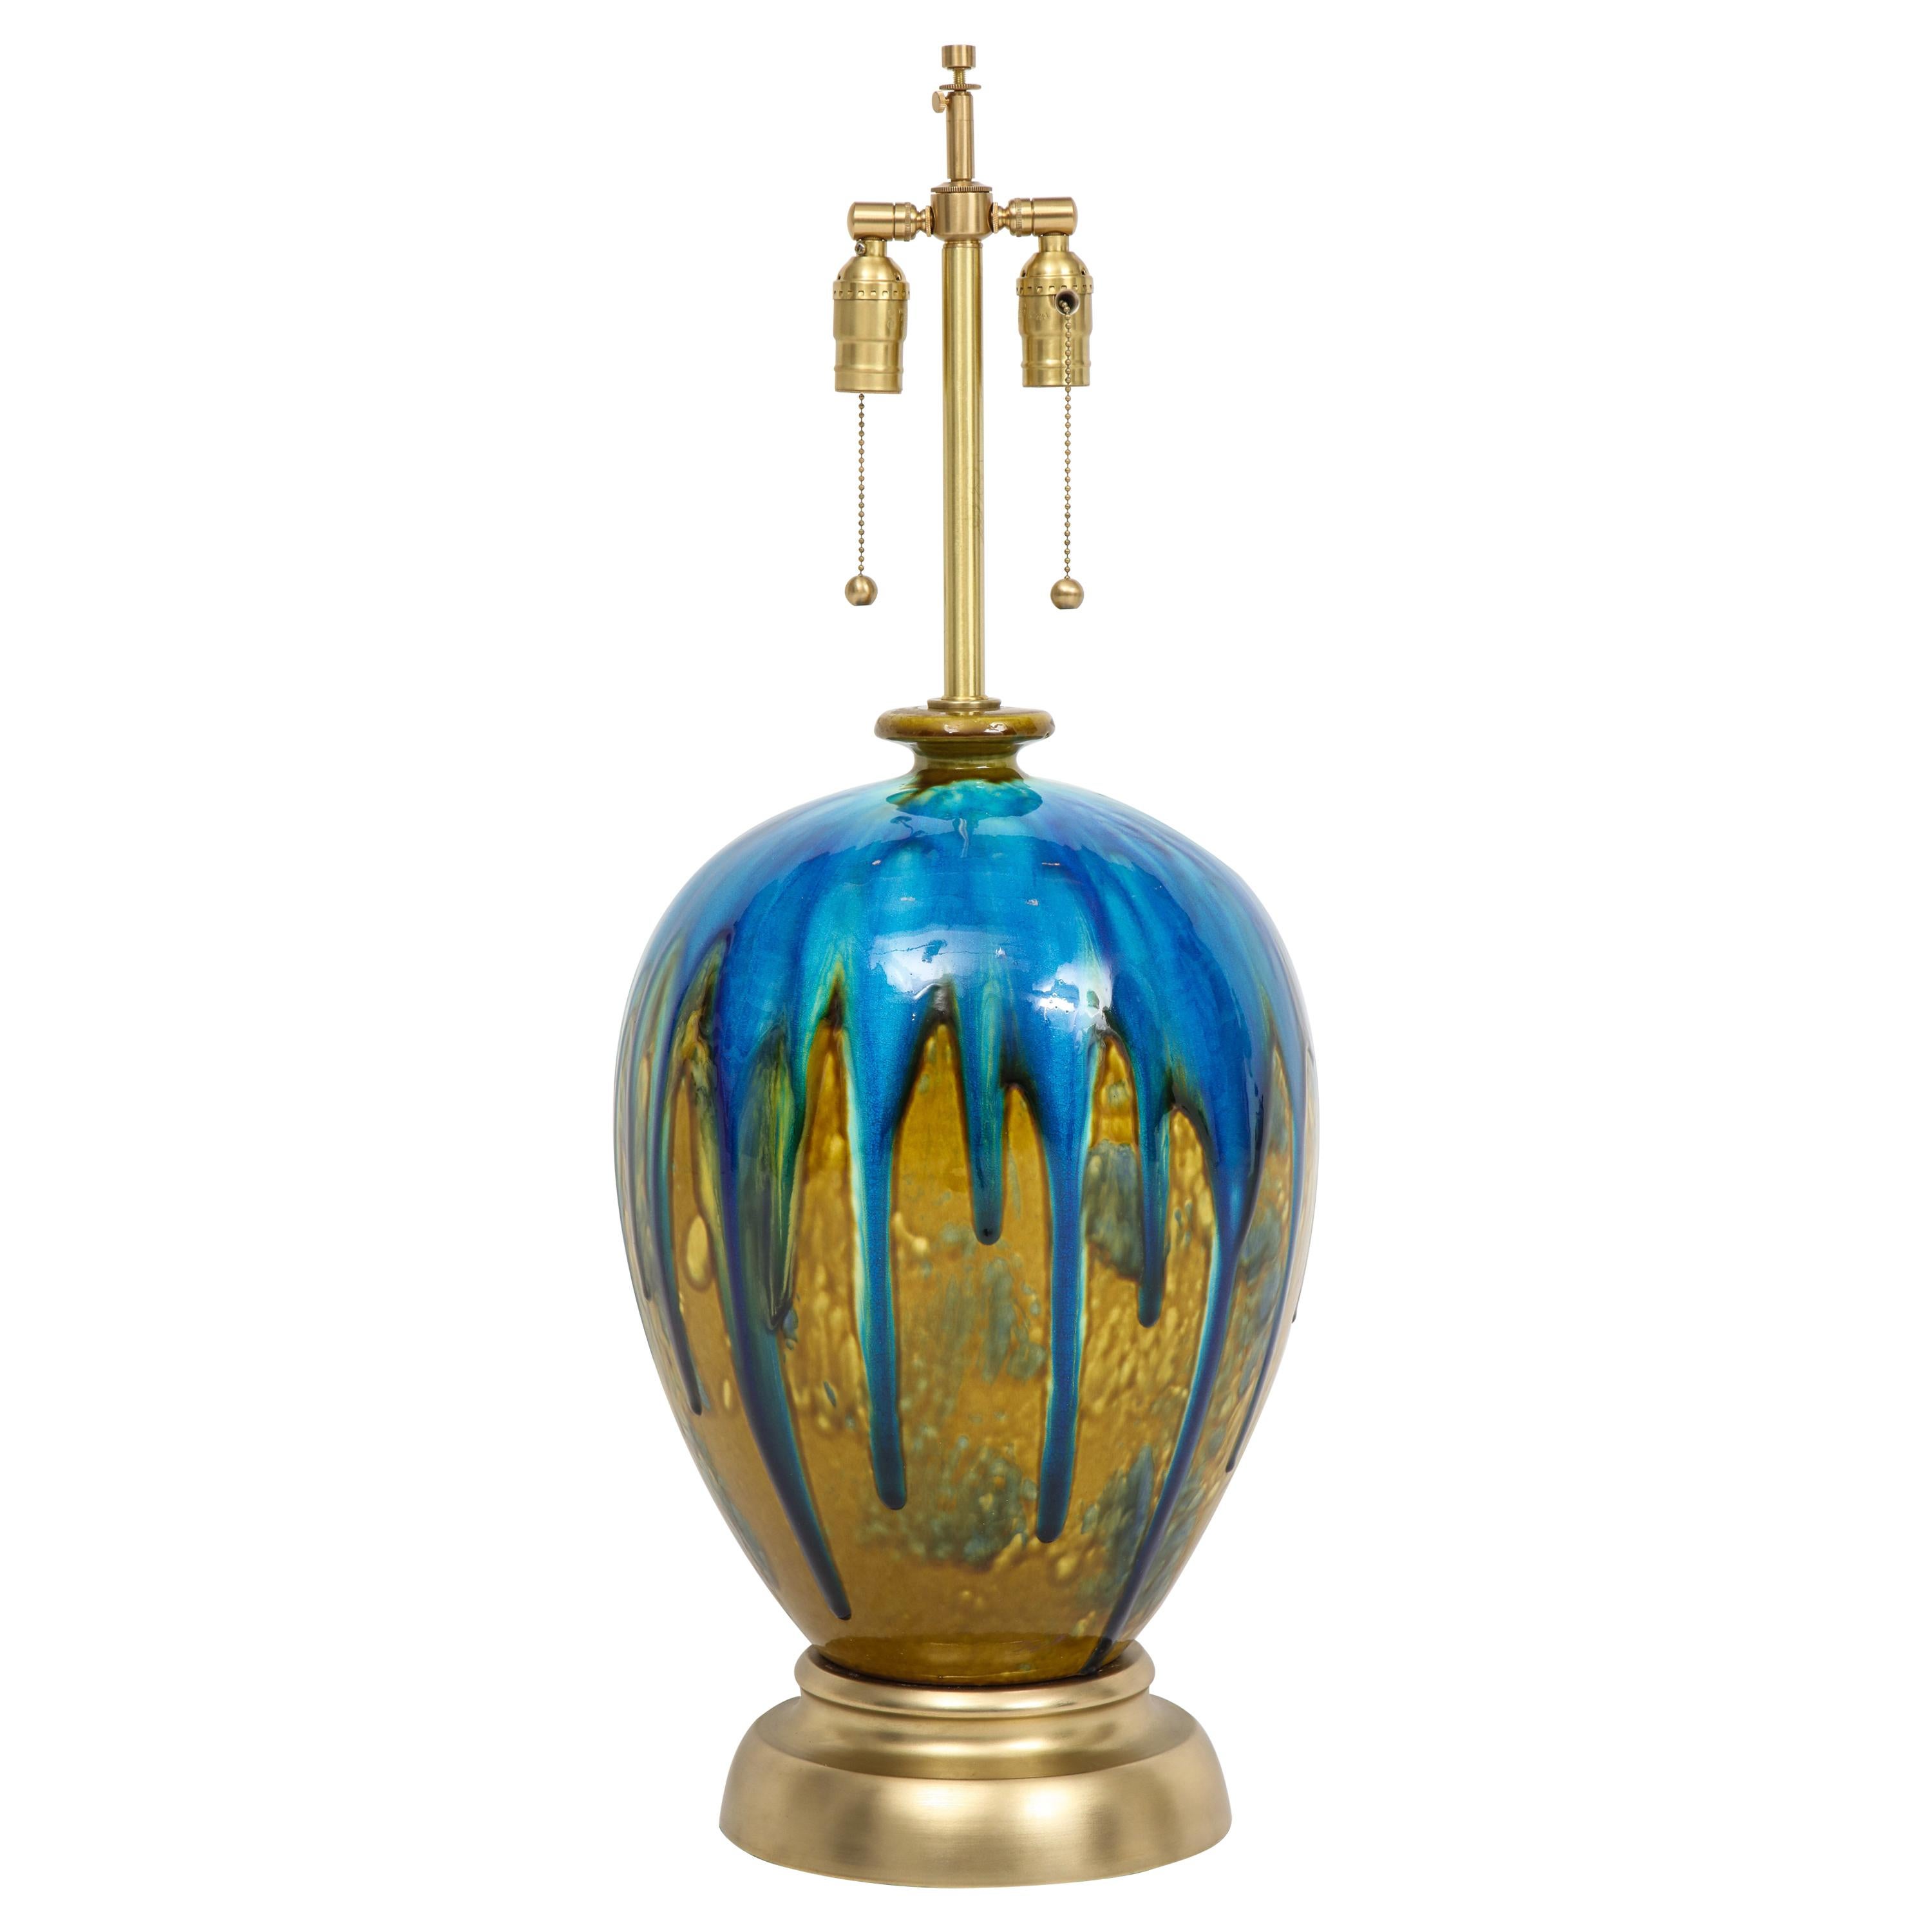 Pair of impressive scale ceramic lamps featuring fantastic drip glaze technique of blues and greens on satin brass bases. Rewired for use in the USA using double pull chain sockets. Mint restored condition.
 